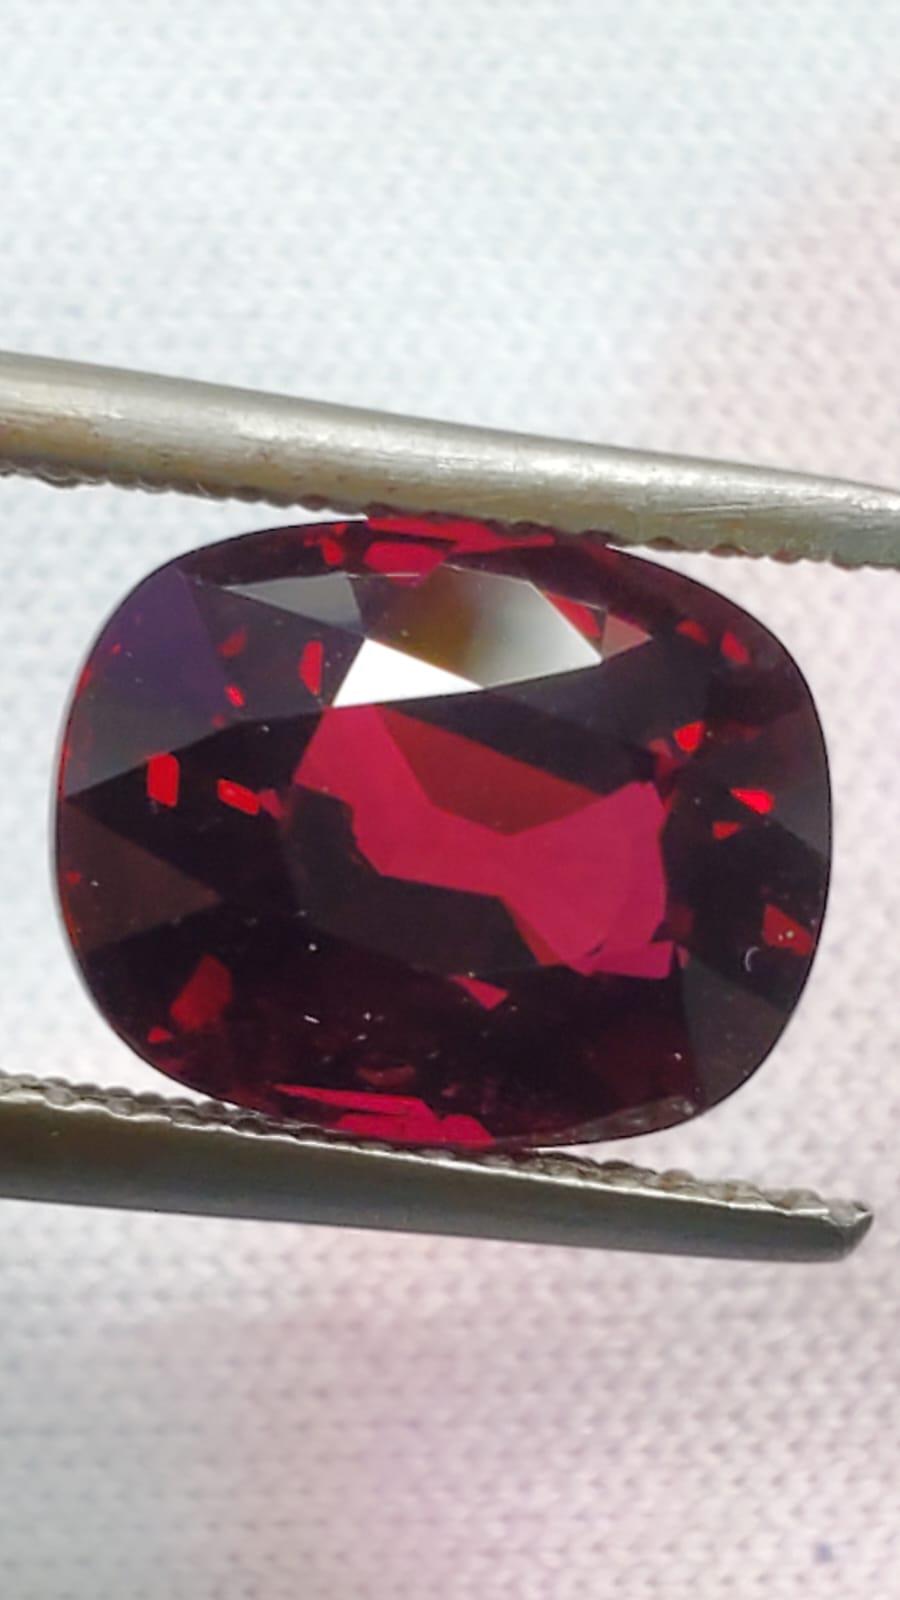 5ct ruby